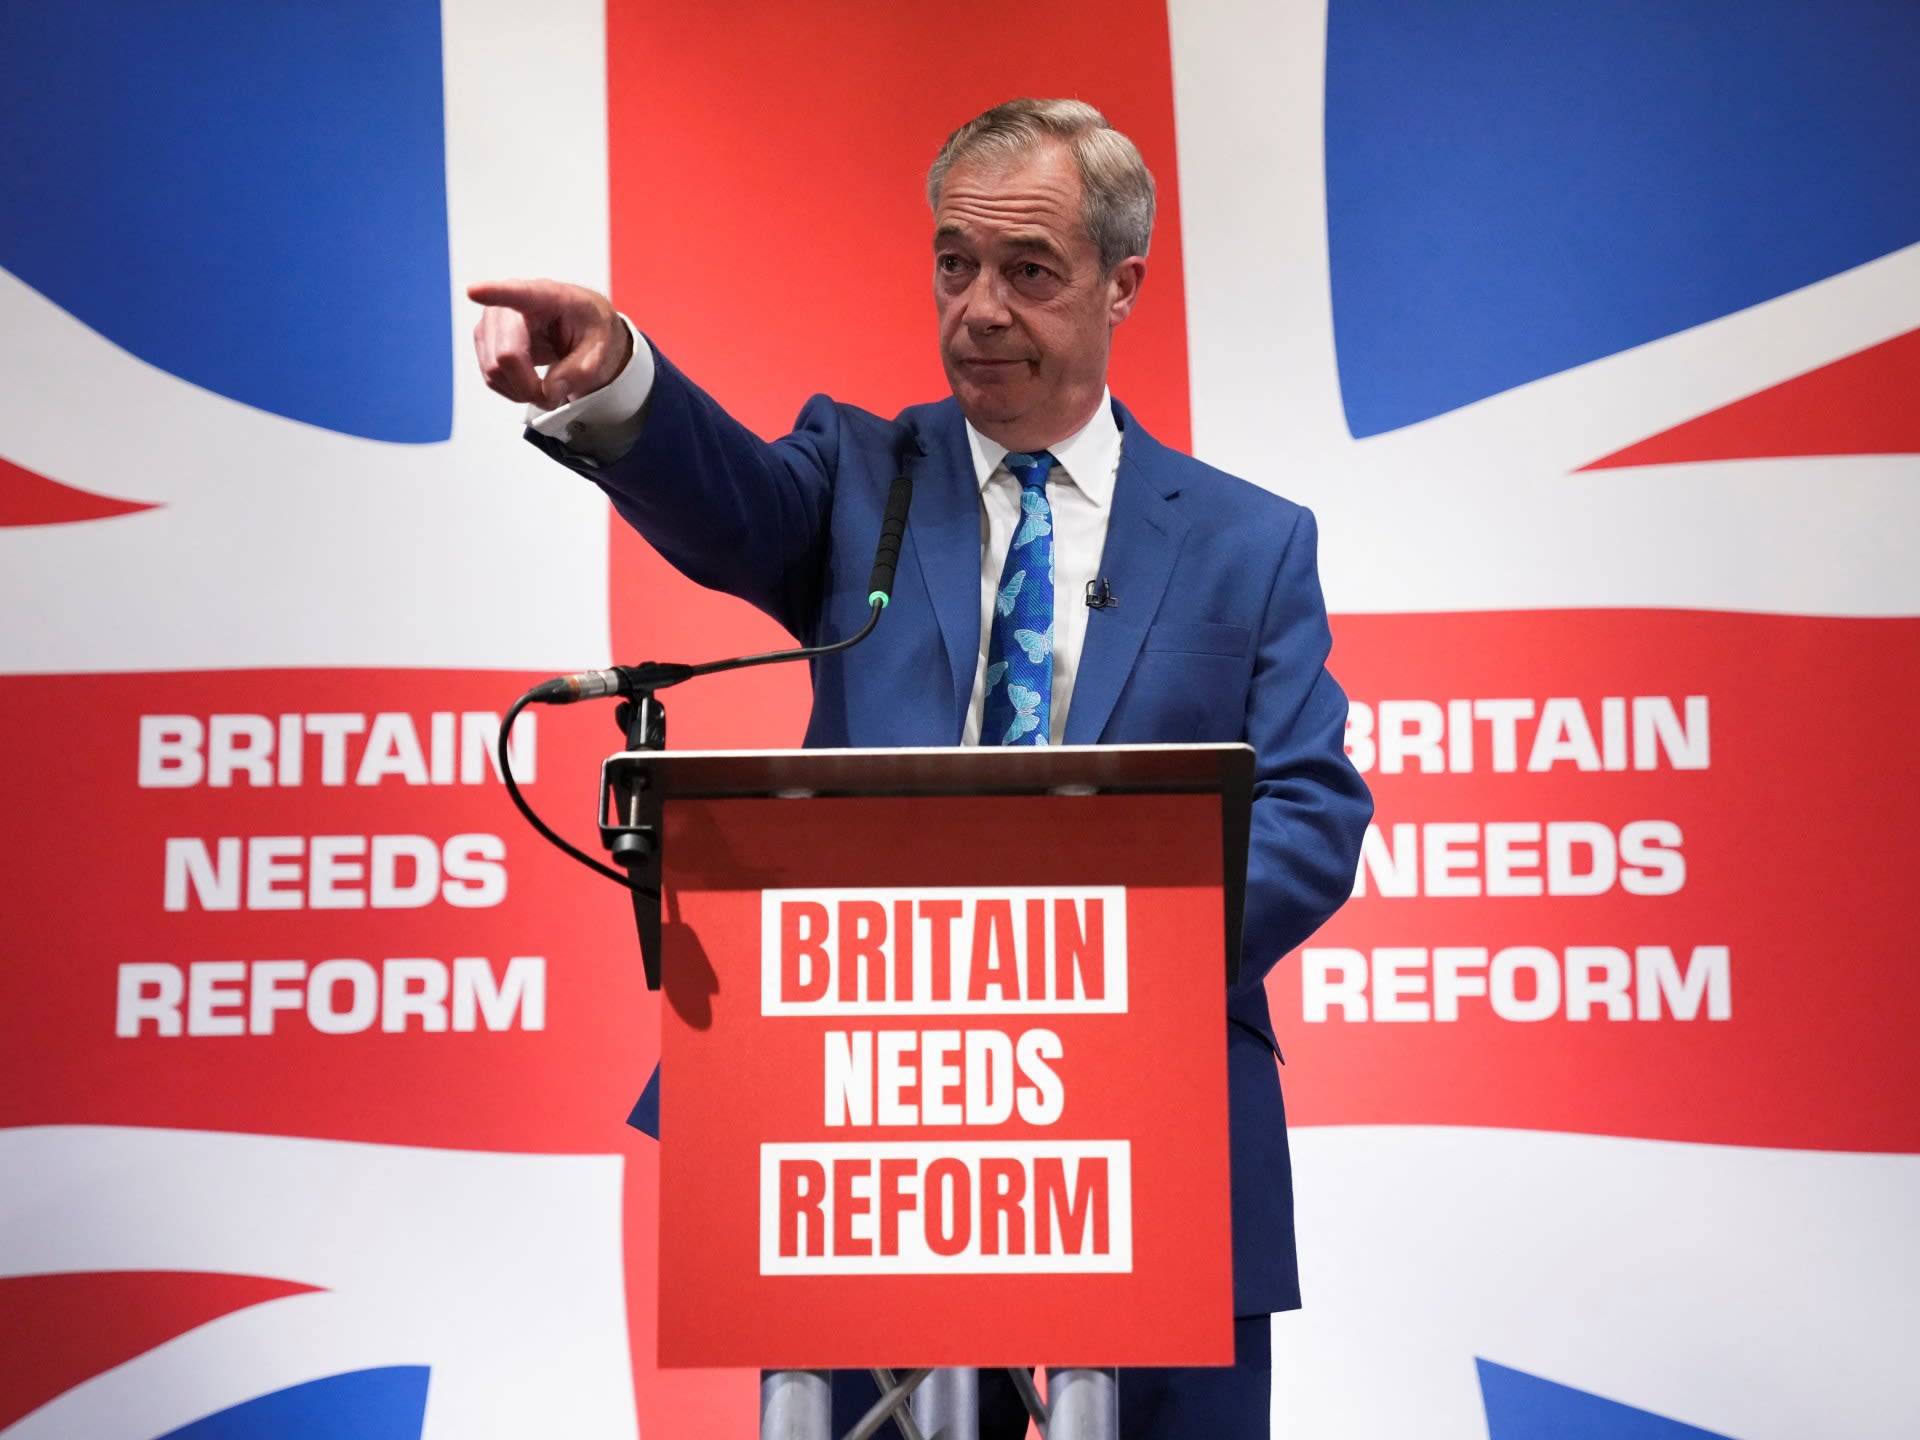 Does Reform UK’s election success signal a far-right future for Britain?